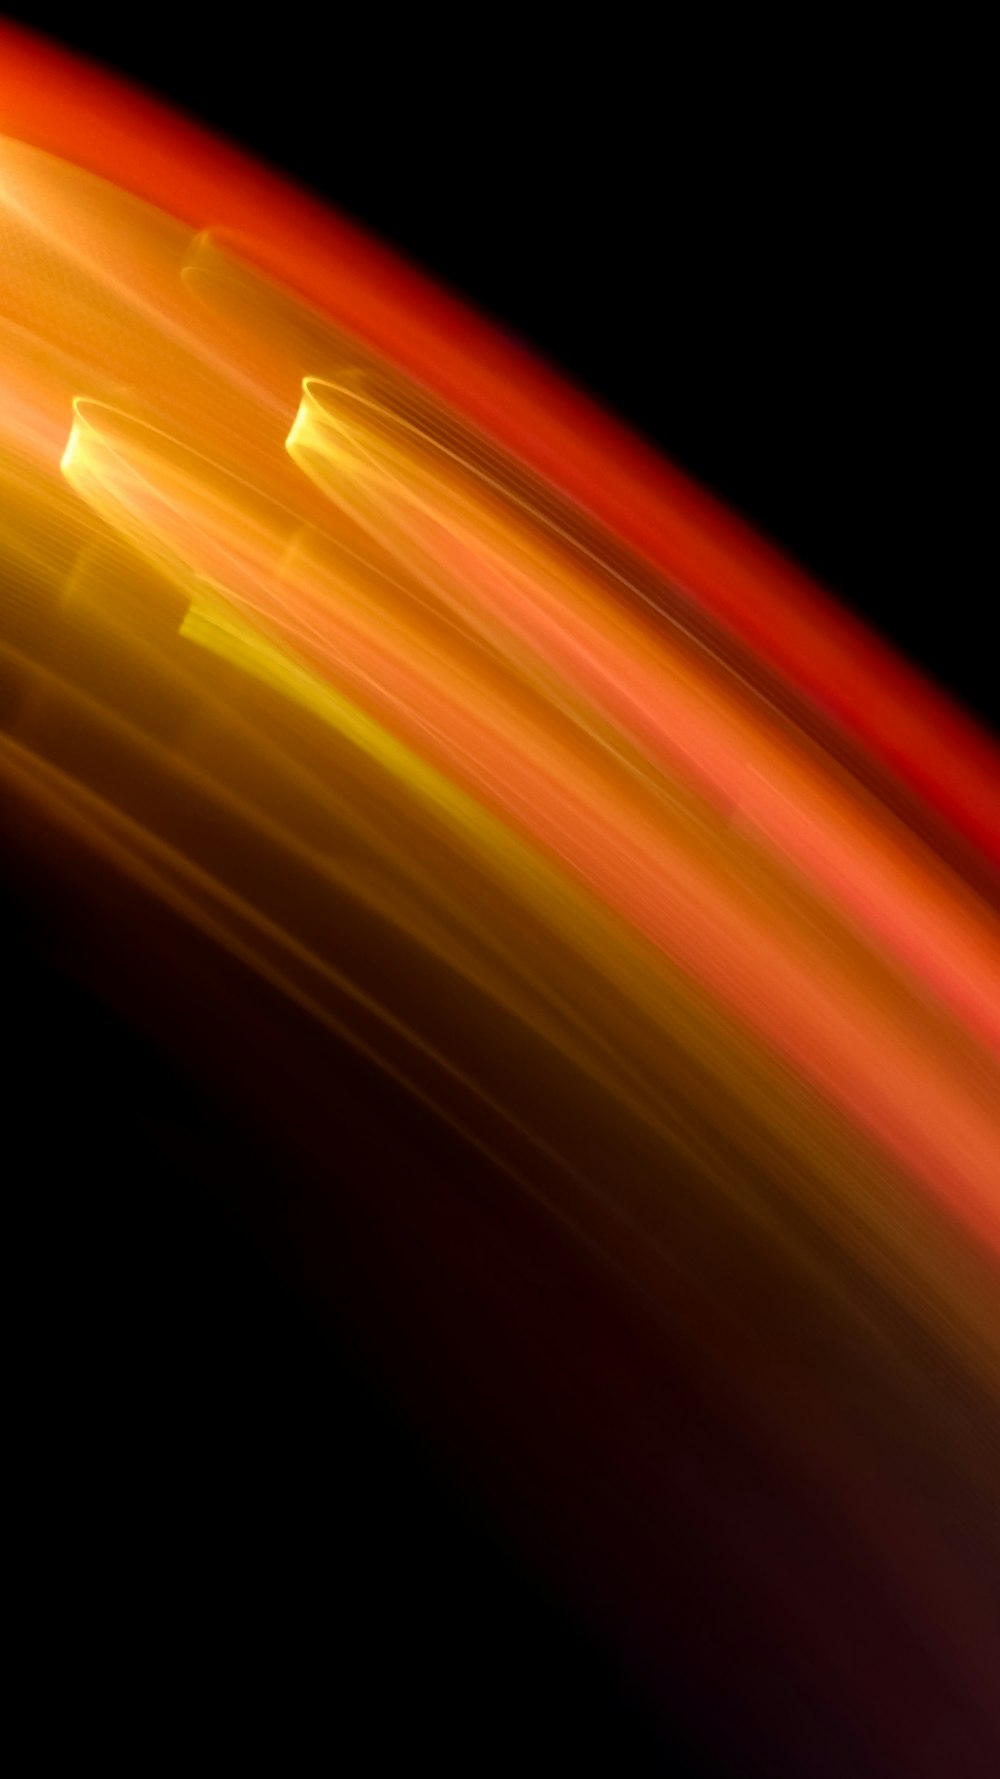 a blurry photo of a red and yellow object